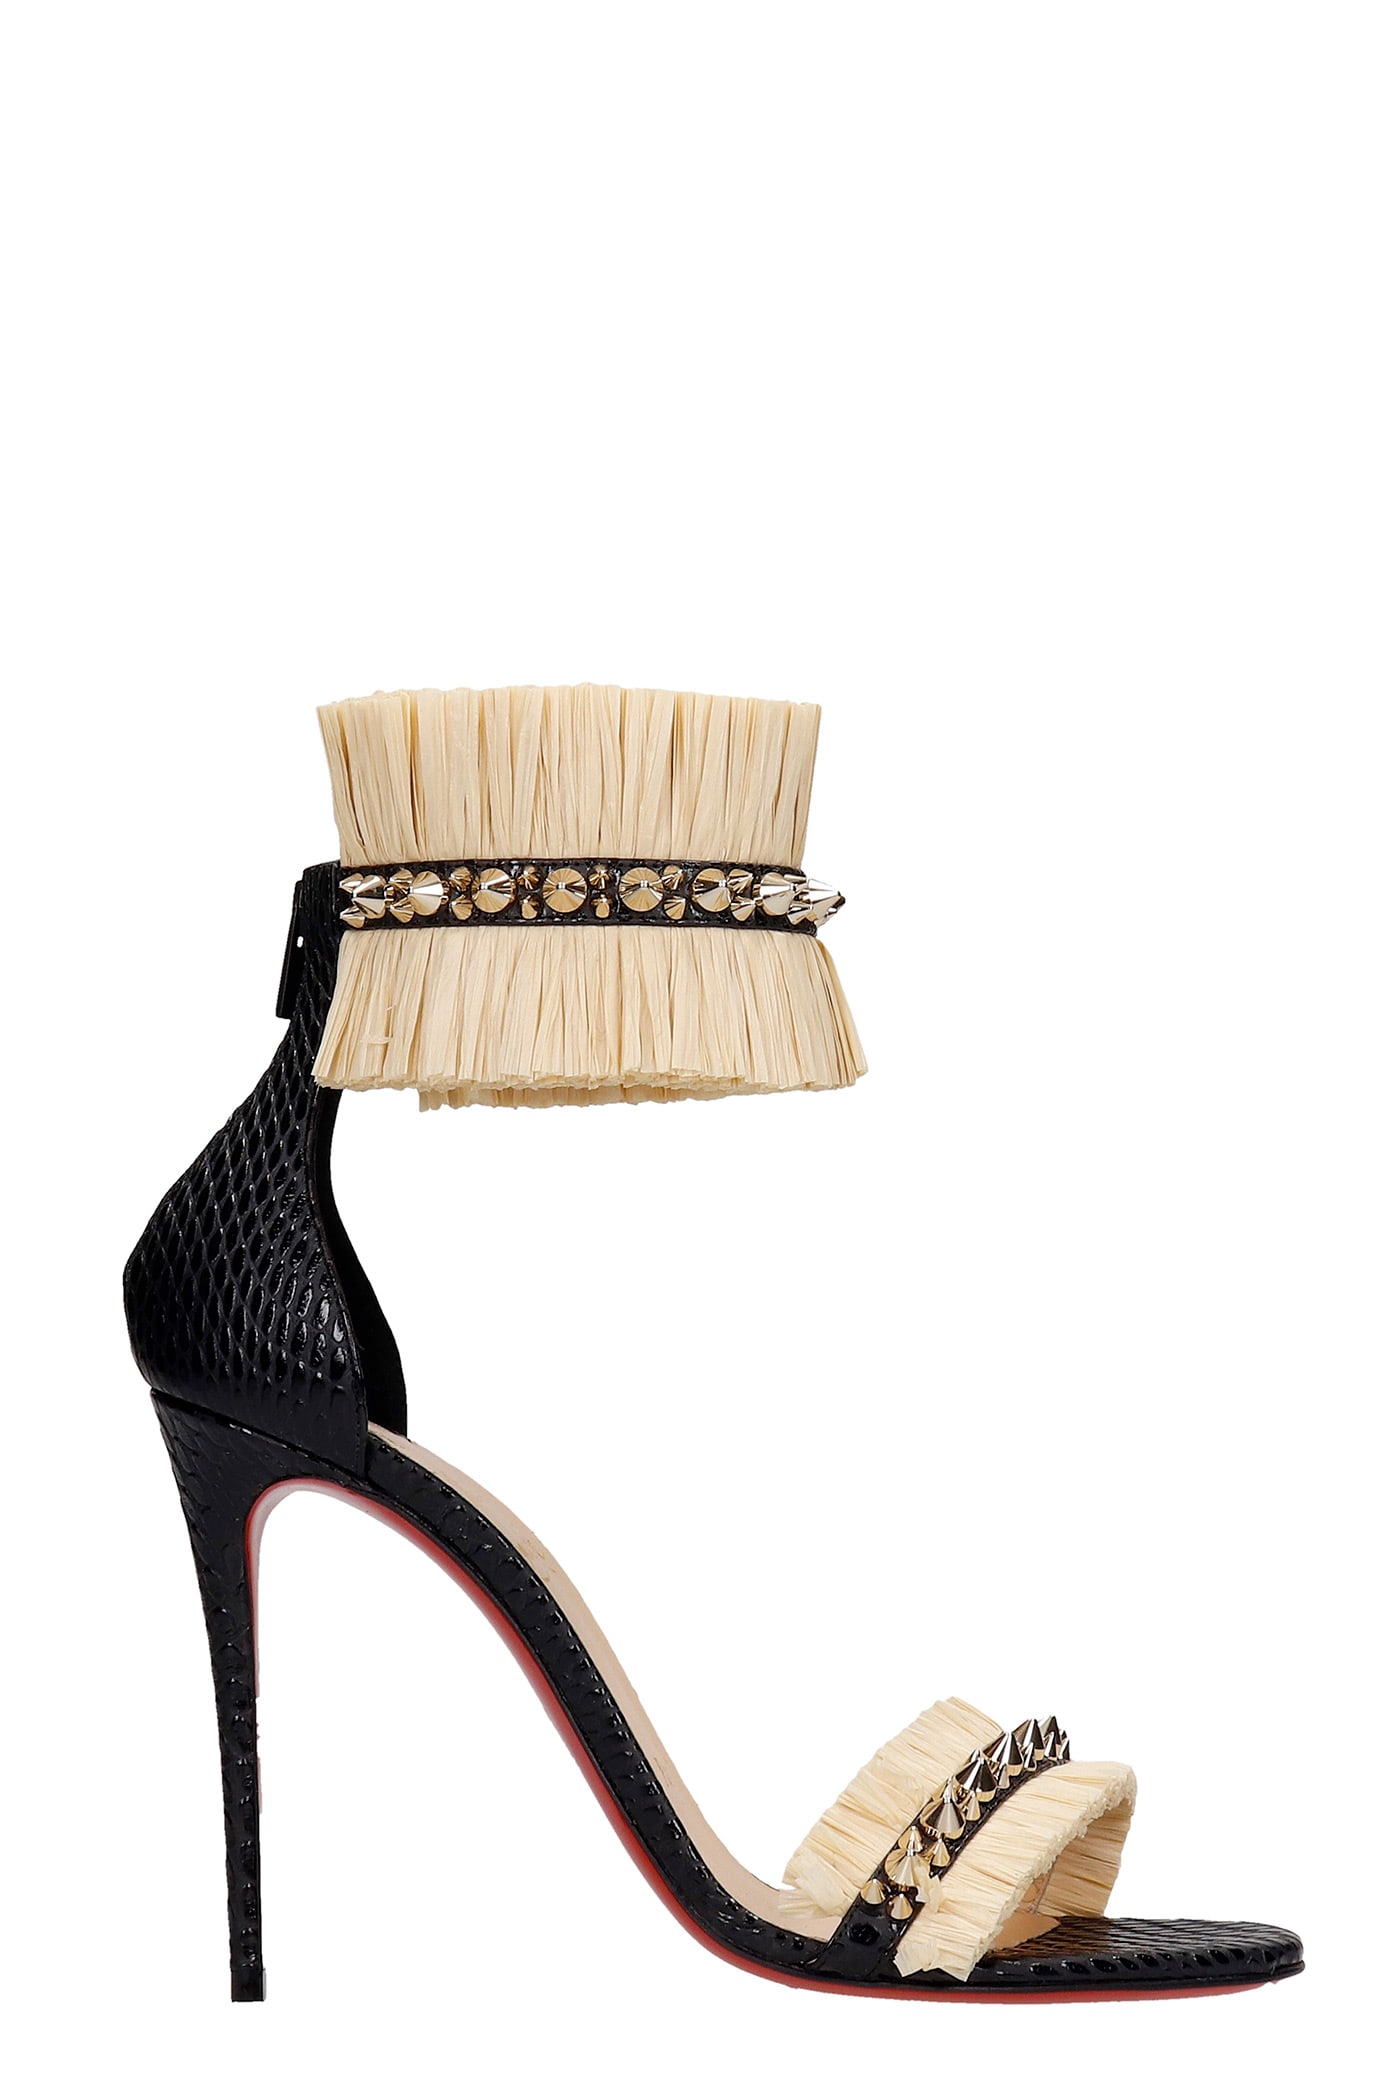 Buy Christian Louboutin Poupedou 100 Sandals In Black Leather online, shop Christian Louboutin shoes with free shipping